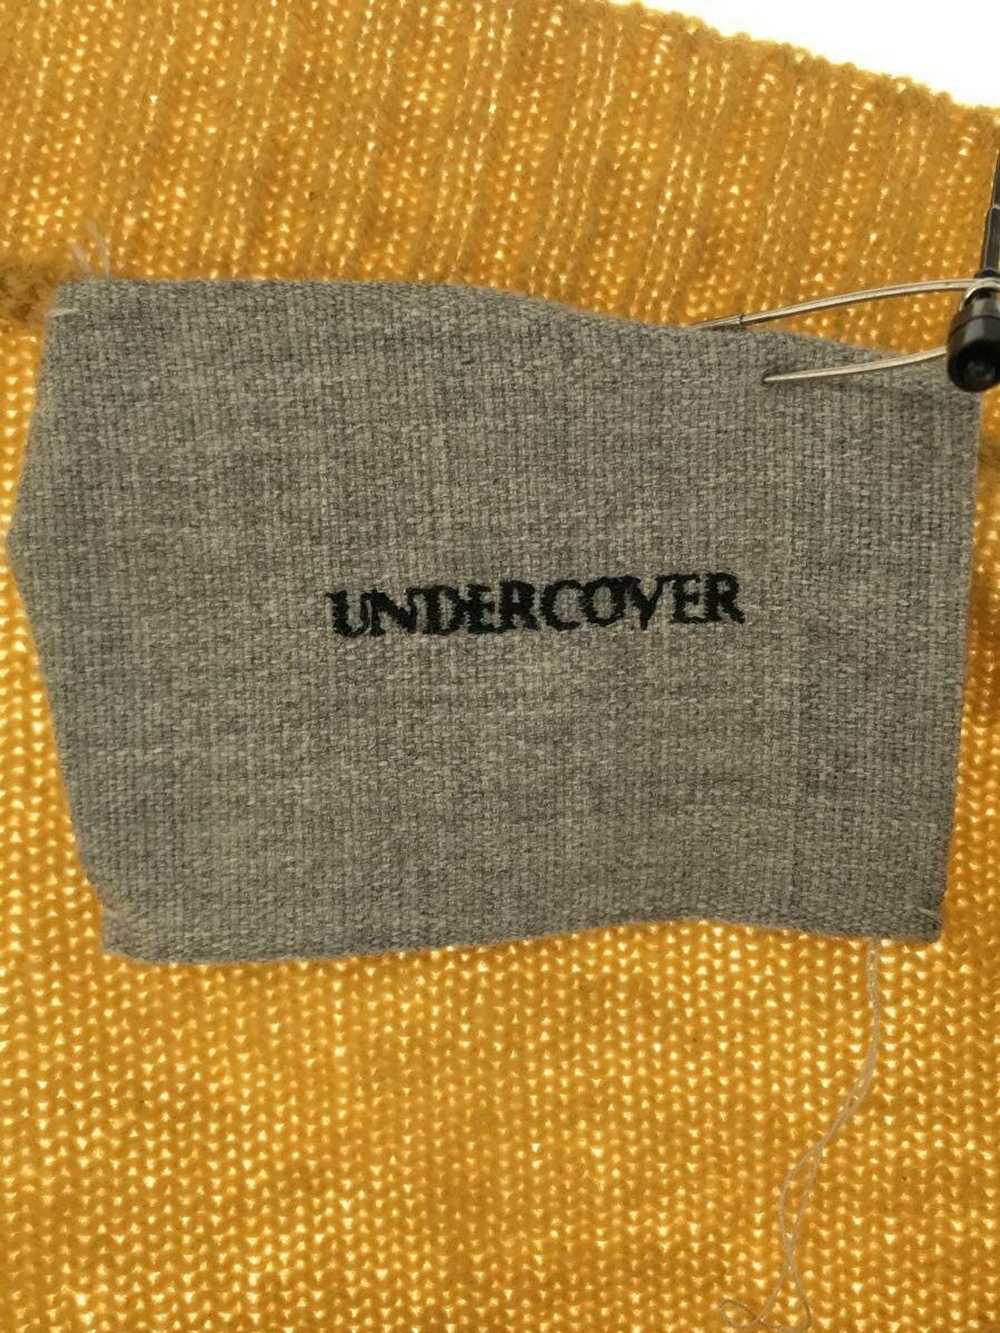 Undercover Sweater Yellow Knit Design Wool Long S… - image 3